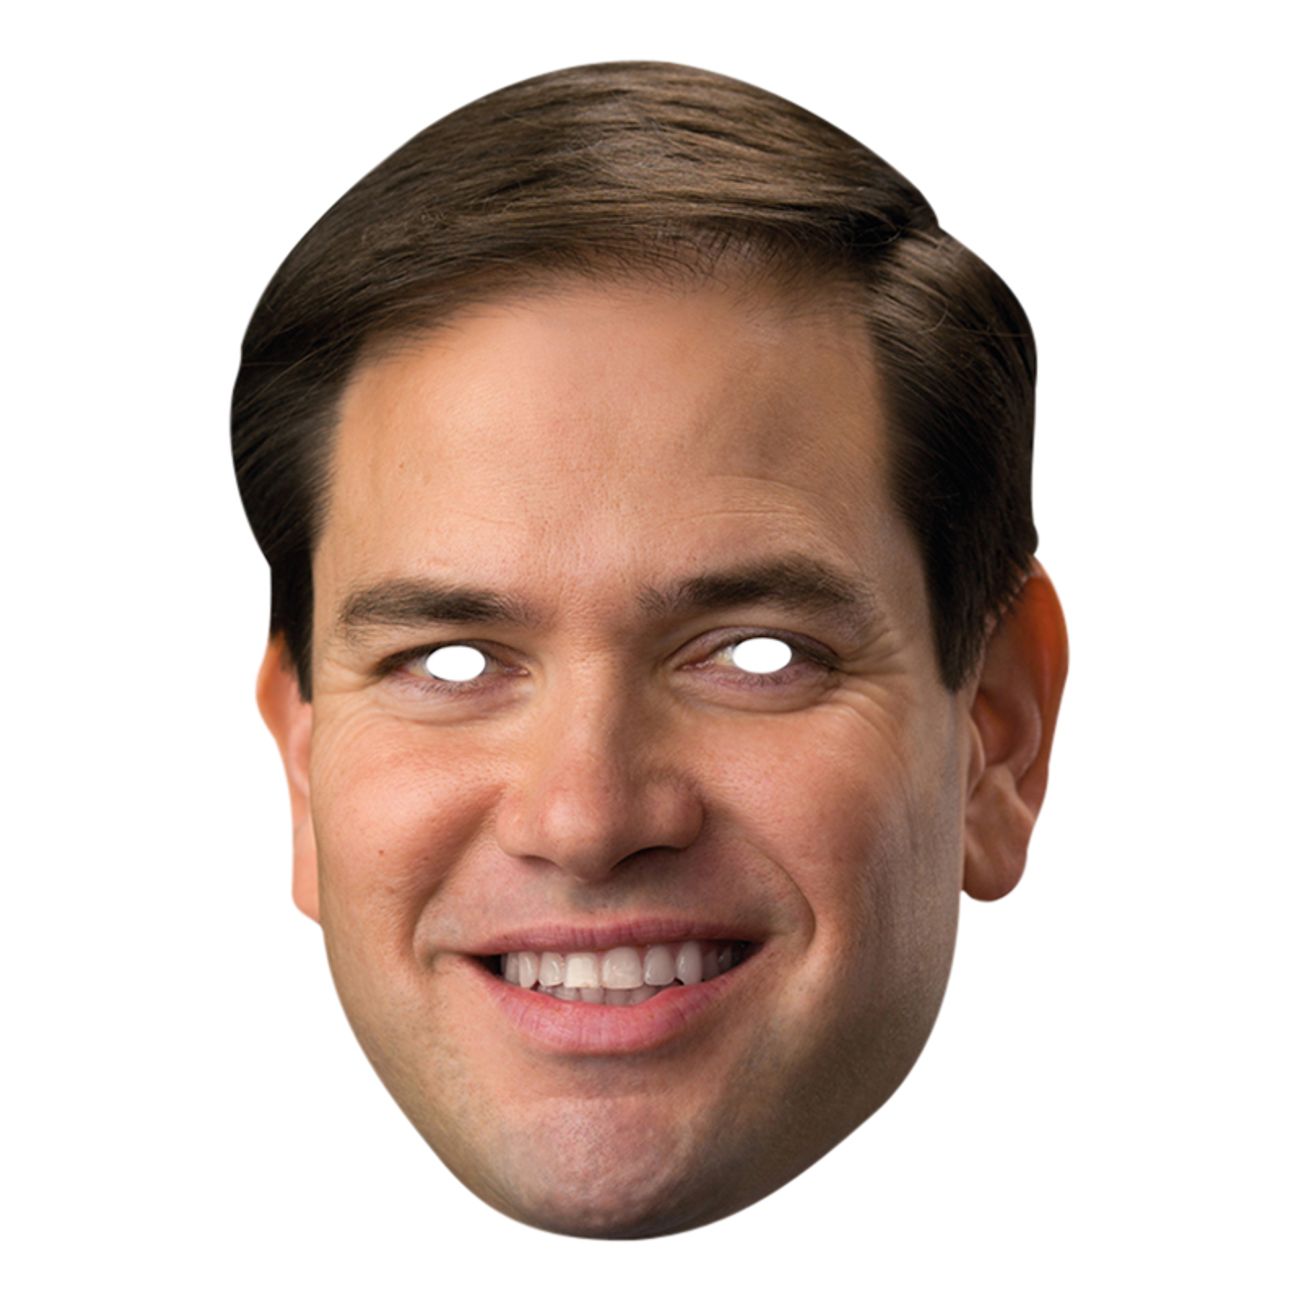 marco-rubio-pappmask-3